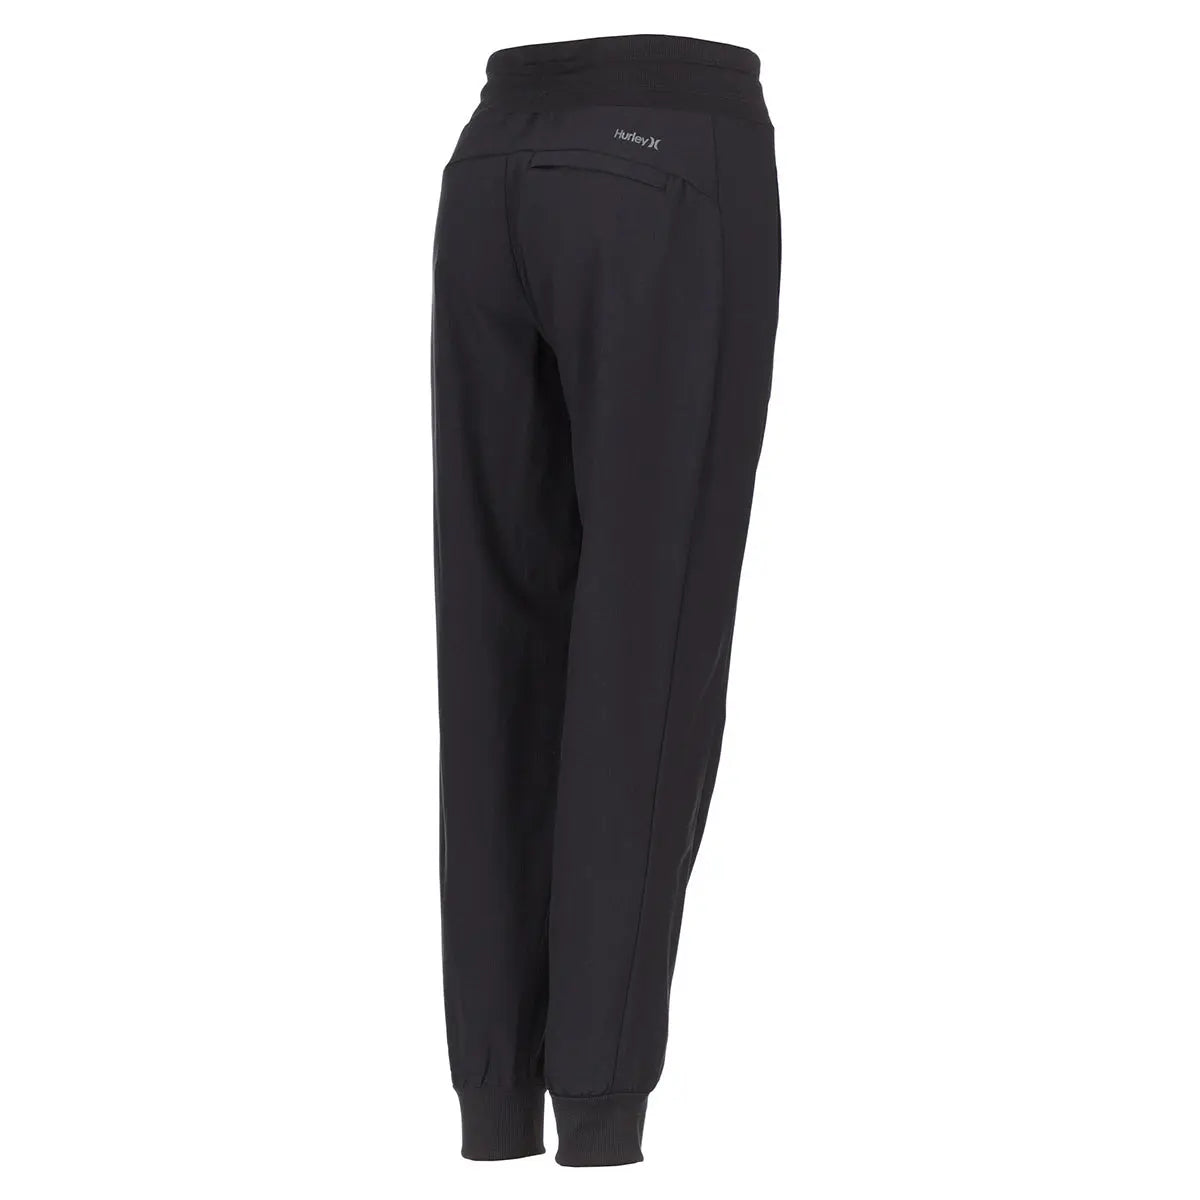 Hurley Women's City Stretch Jogger